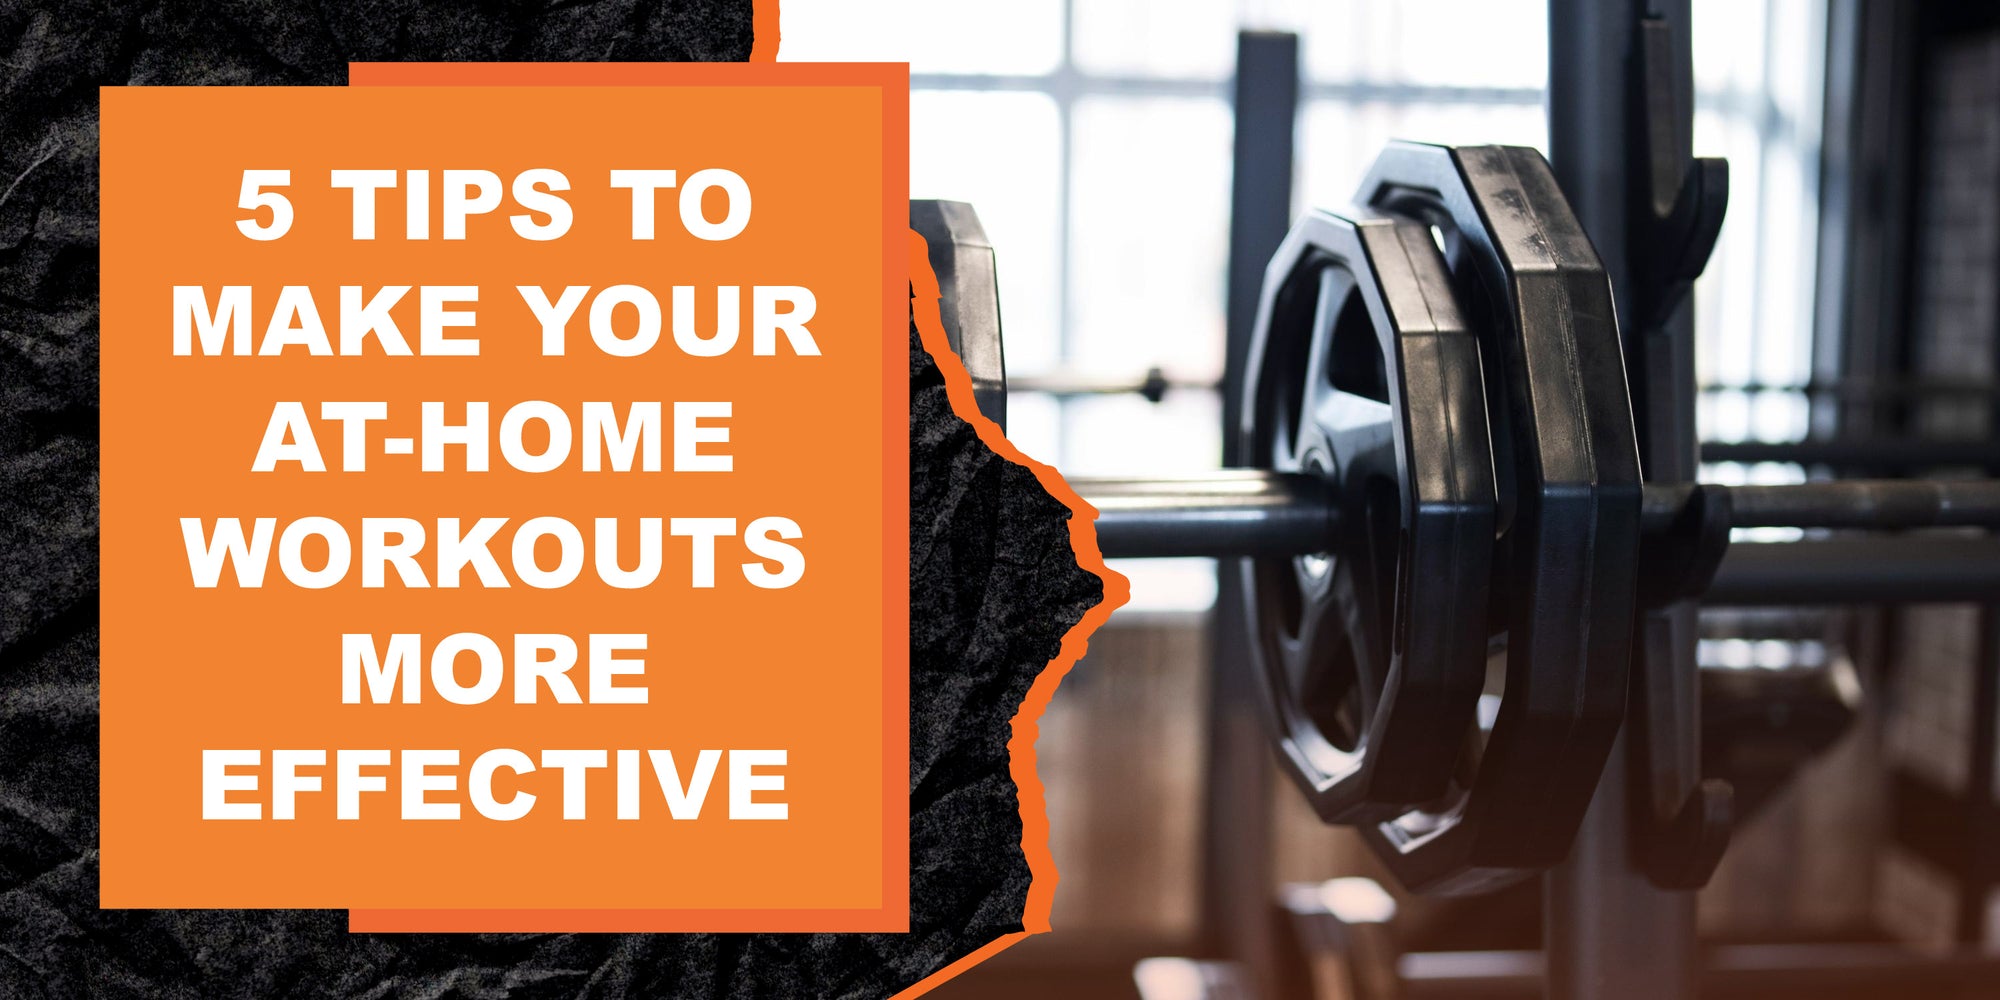 5 Tips to Make Your At-Home Workouts More Effective